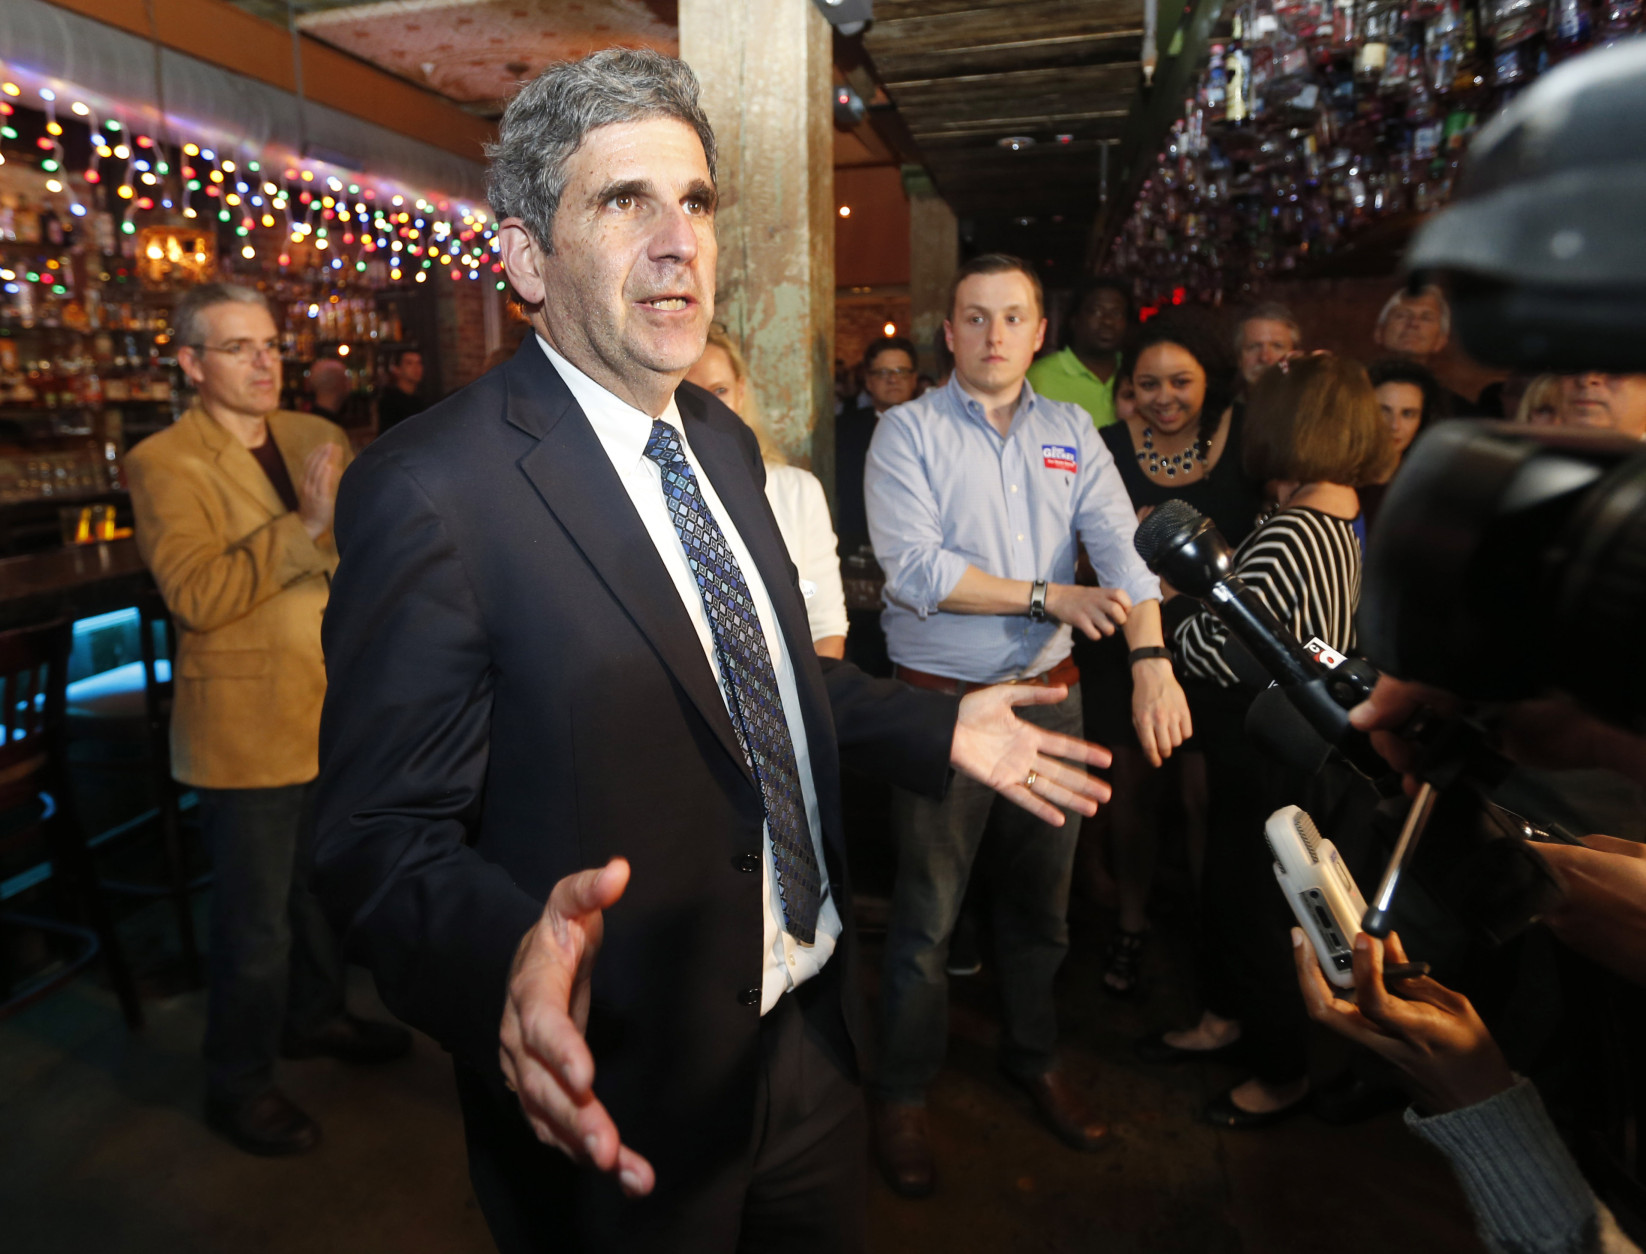 Democrat Dan Gecker speaks to a crowd of supporters at an election party in Richmond, Va., Tuesday, Nov. 3, 2015. Republican Glen Sturtevant narrowly defeated Gecker to hold a seat currently held by retiring GOP Sen. John Watkins. (AP Photo/Steve Helber)